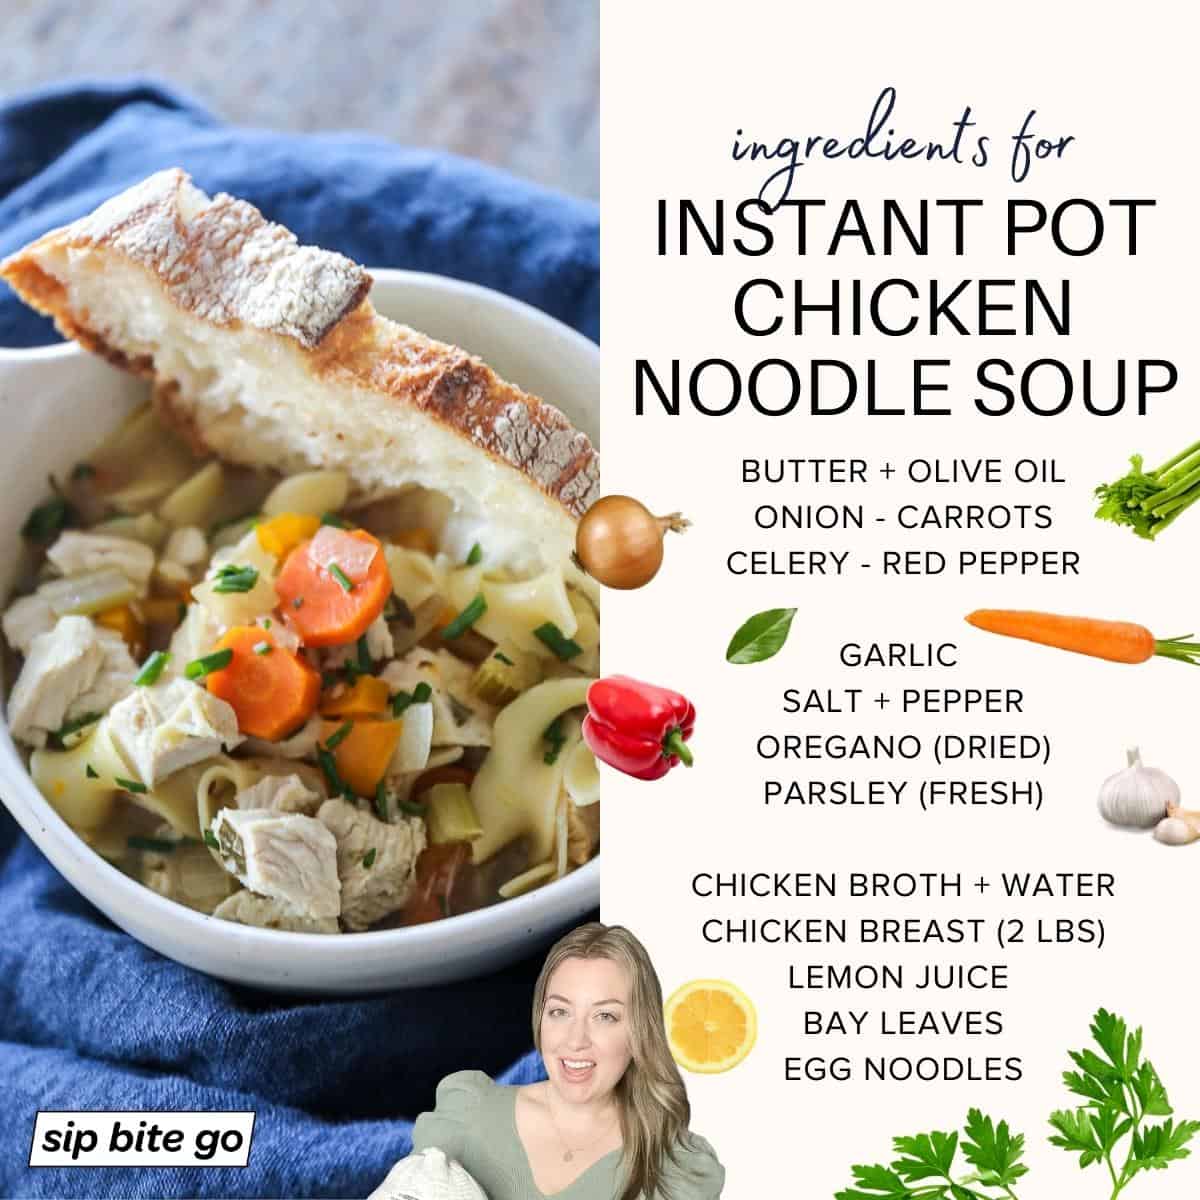 Infographic demonstrating ingredients for pressure cooker Instant Pot Chicken Noodle Soup Recipe